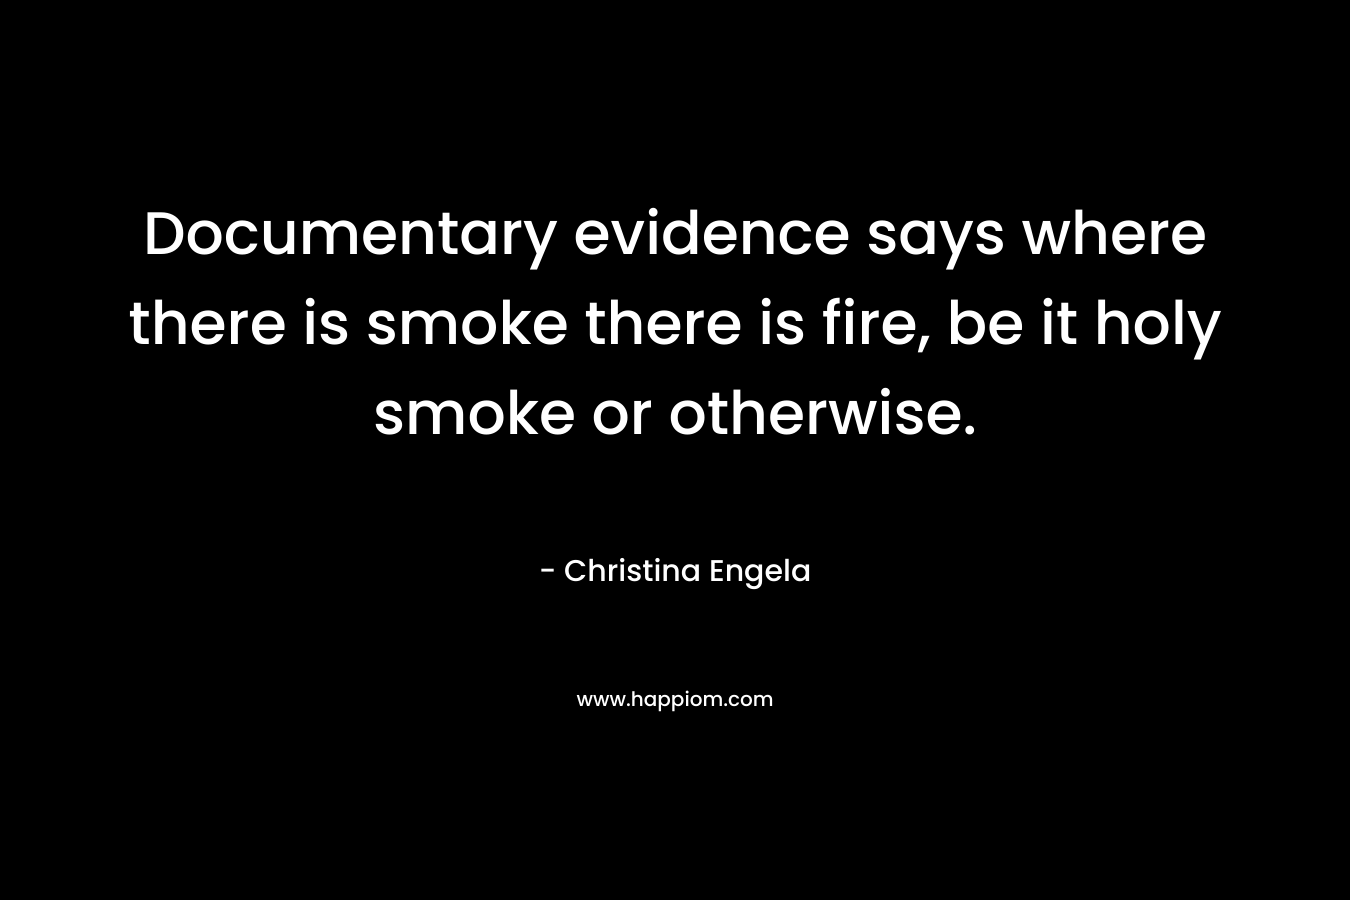 Documentary evidence says where there is smoke there is fire, be it holy smoke or otherwise. – Christina Engela